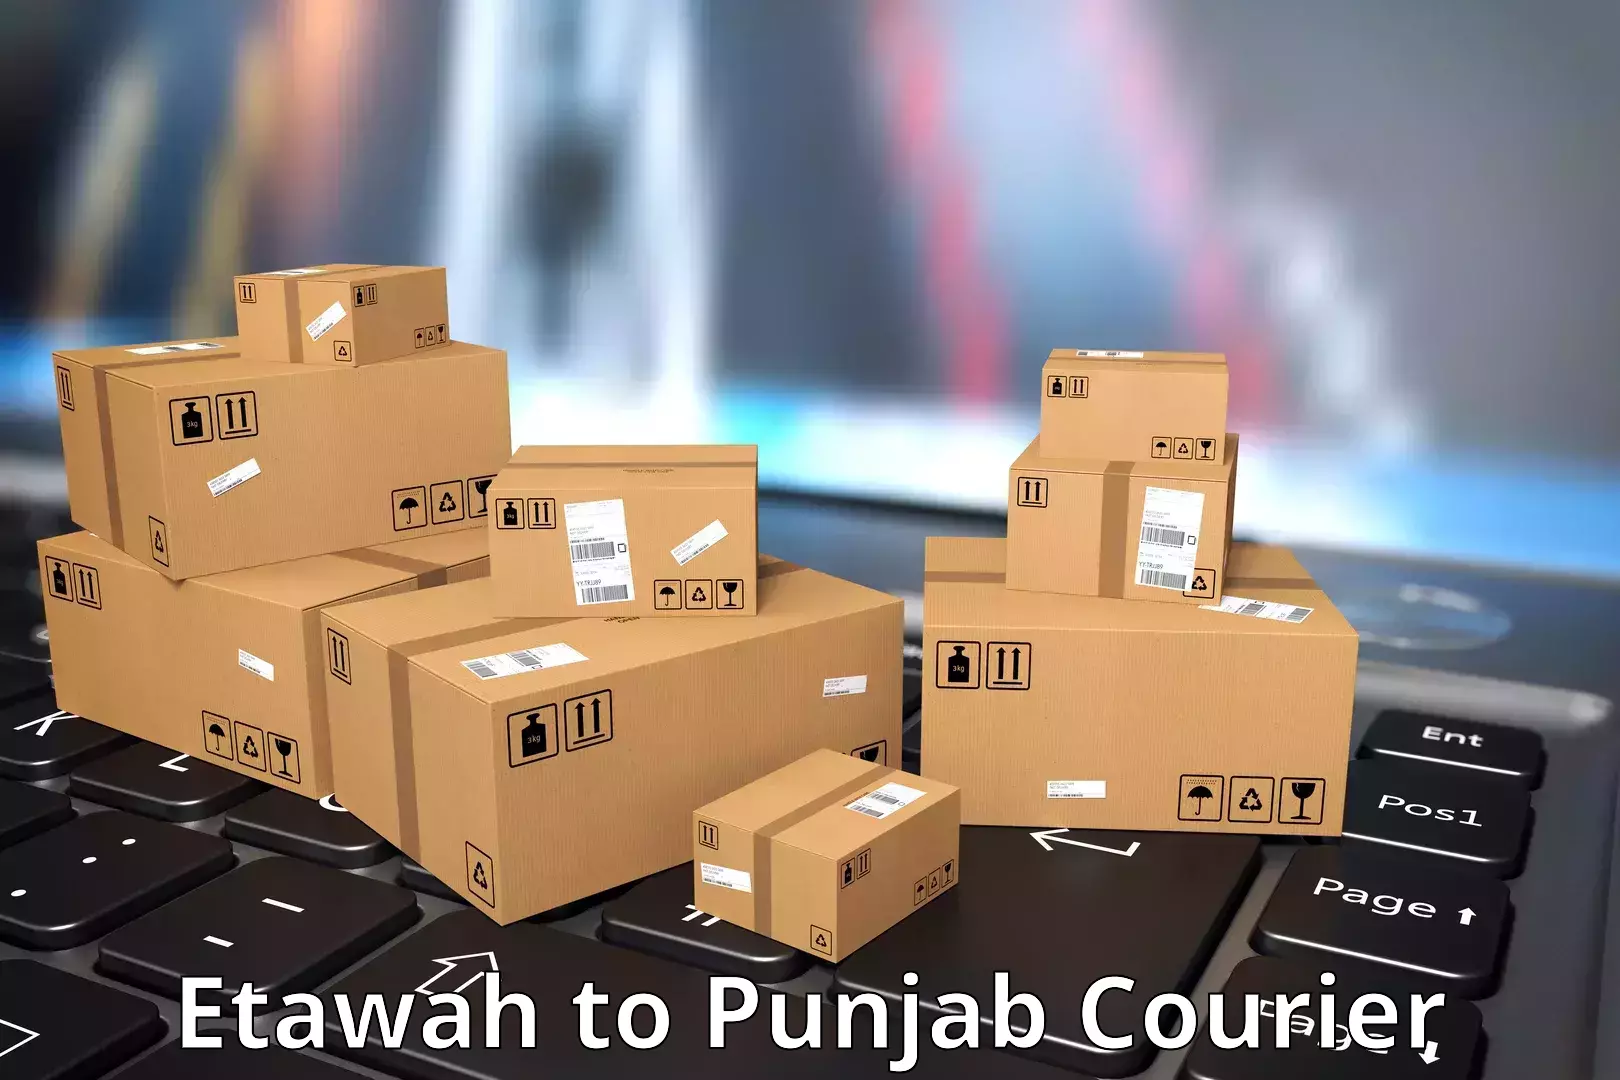 Courier service innovation Etawah to Punjab Agricultural University Ludhiana